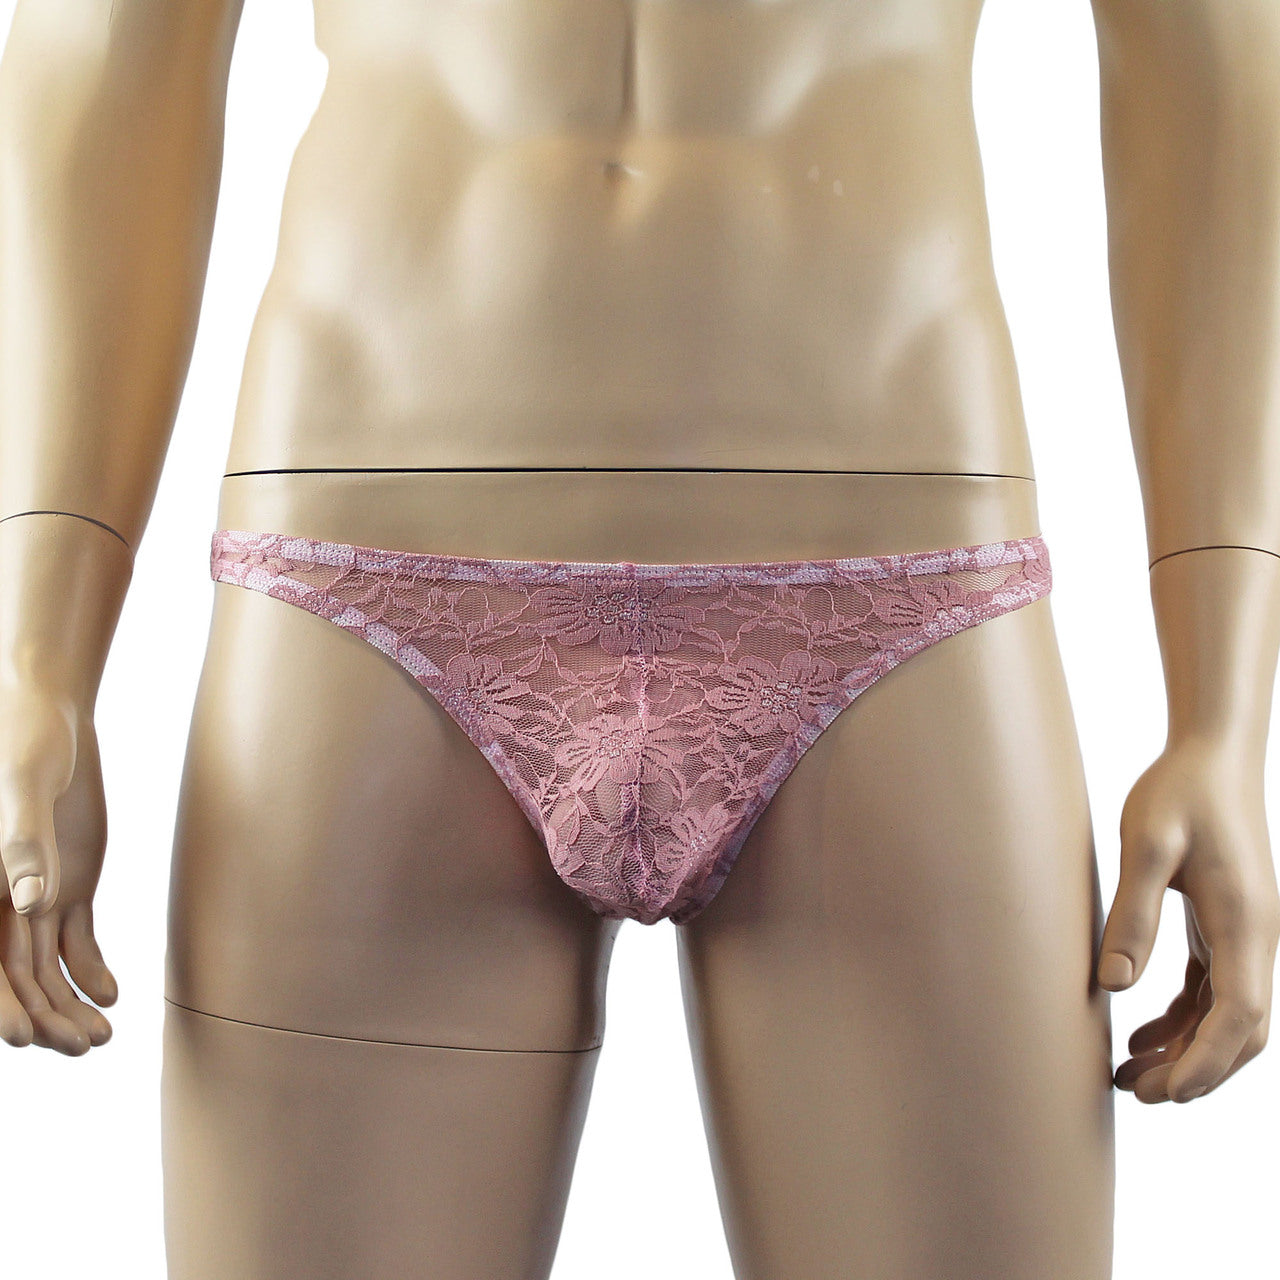 Mens Lingerie Lace Thong G string (dusty pink plus other colours)